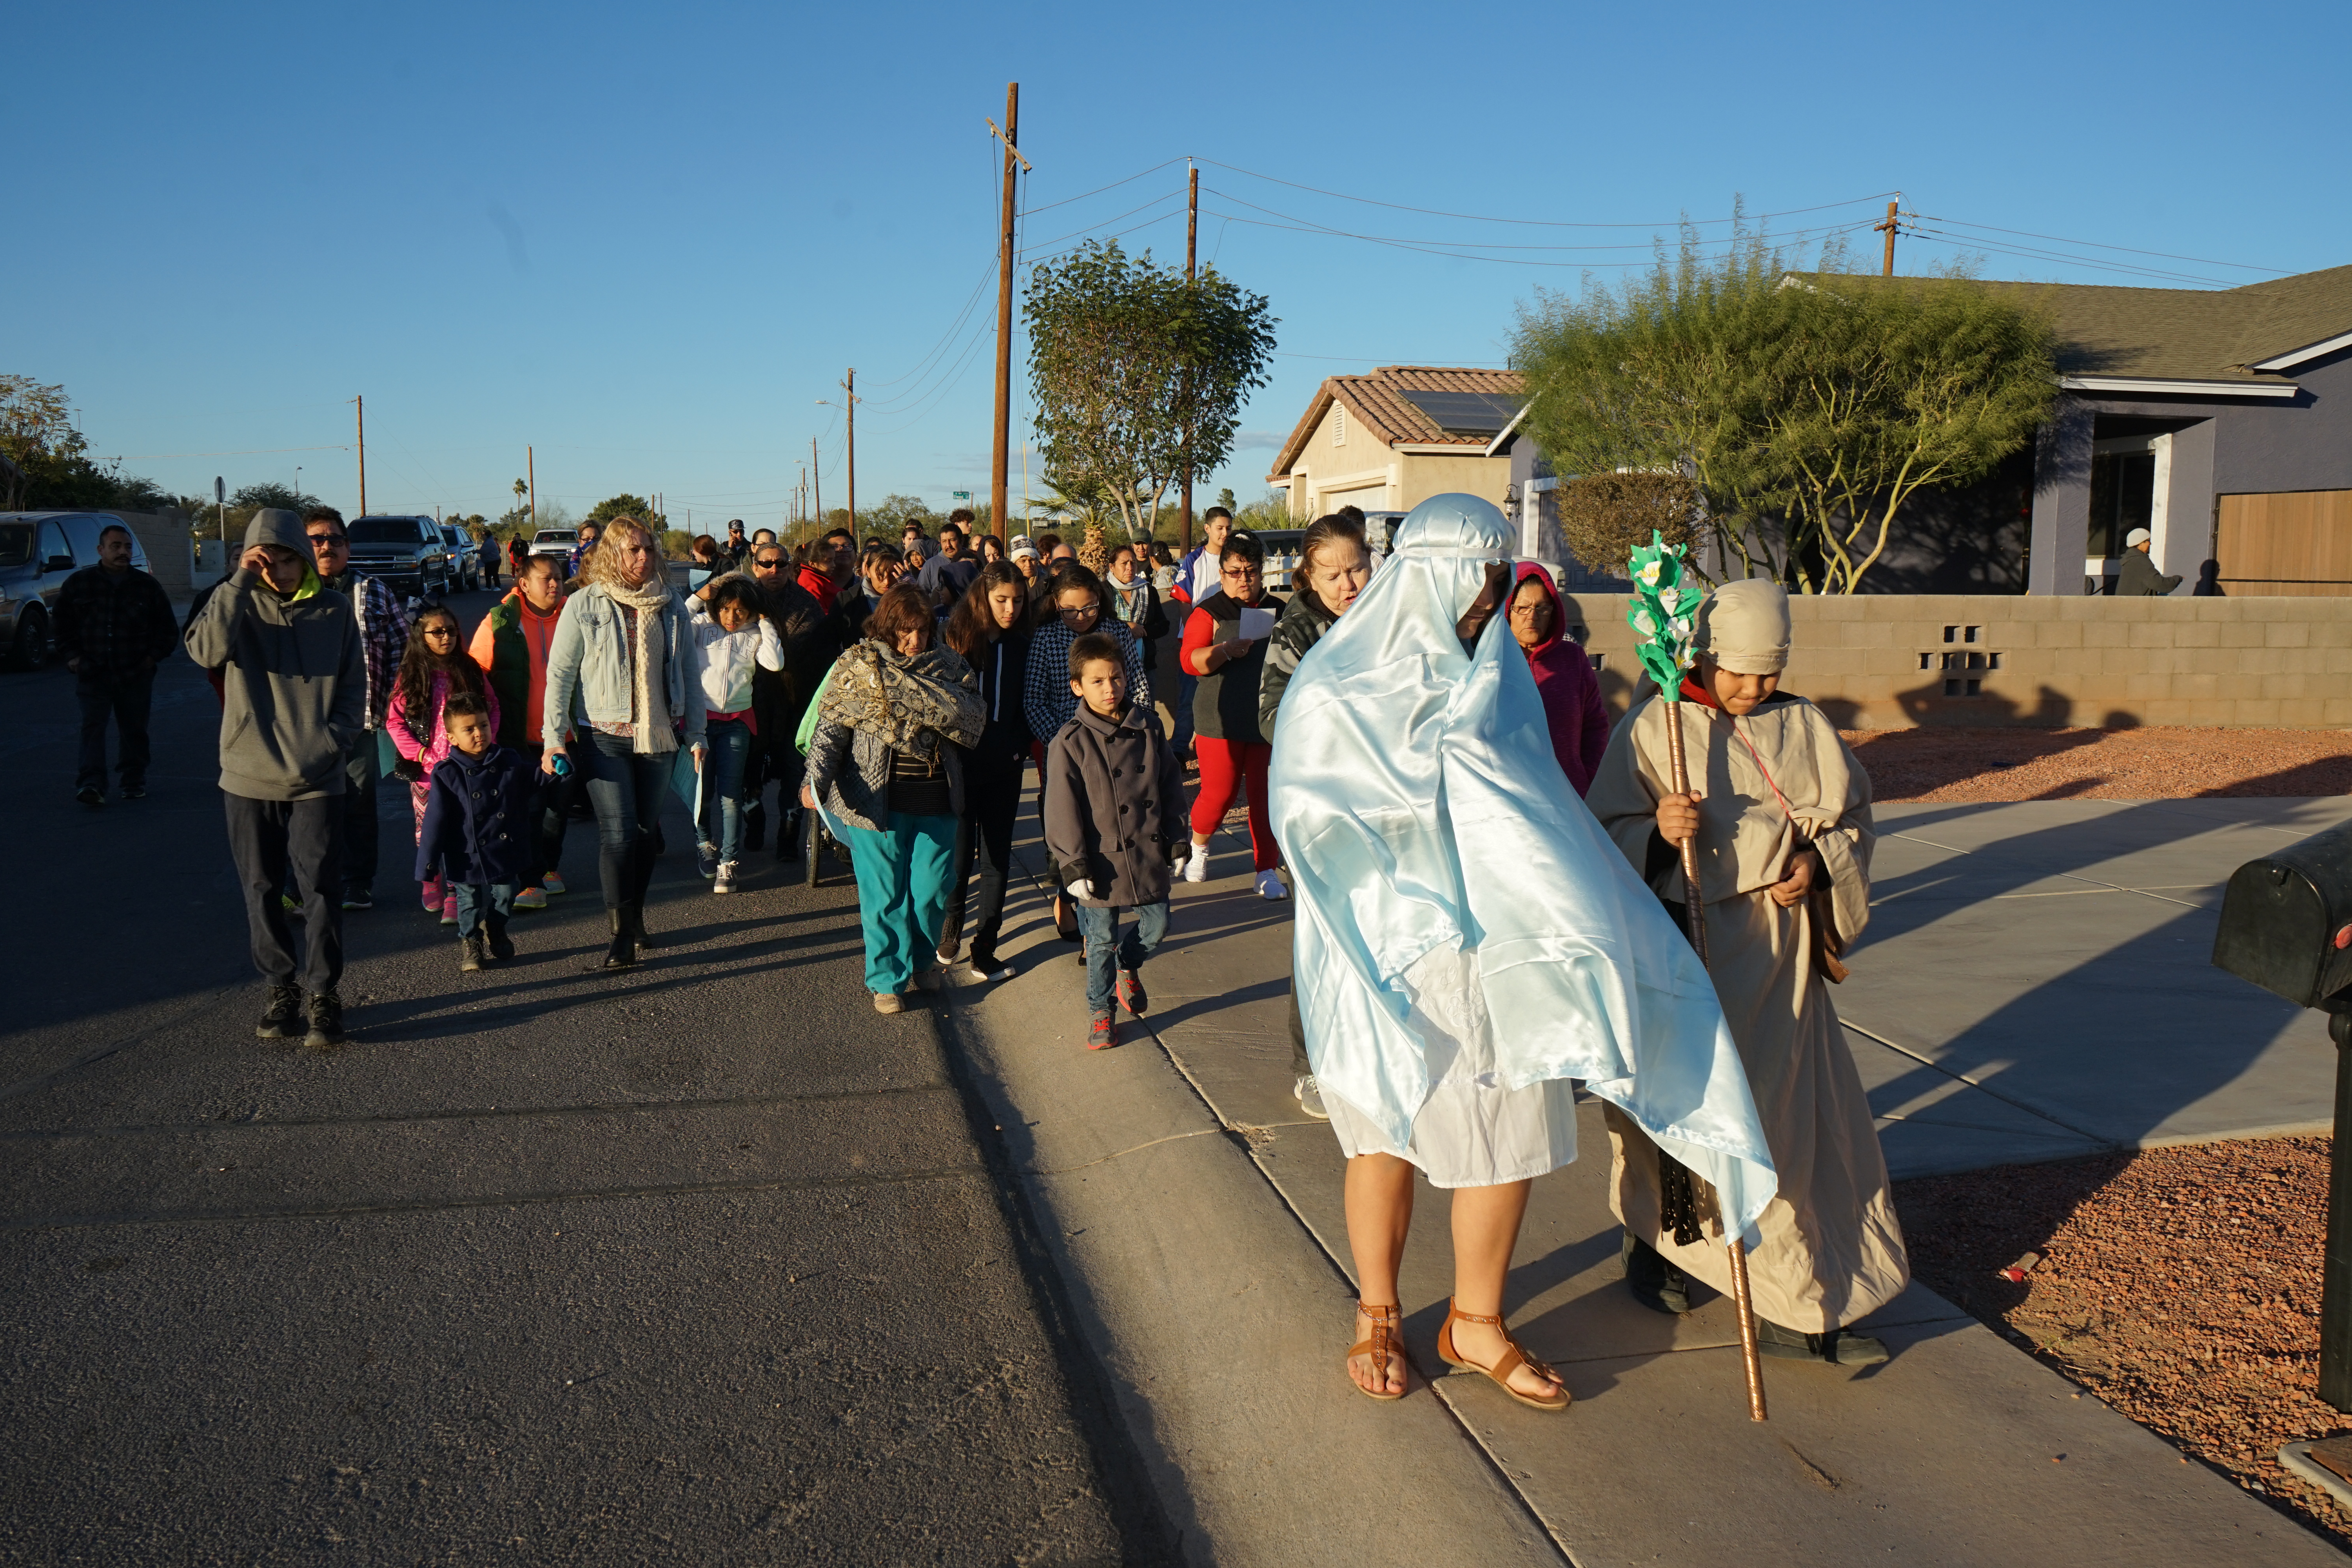 The group outside asks for lodging, or “posada,” and the group inside rejects them at each stop. 